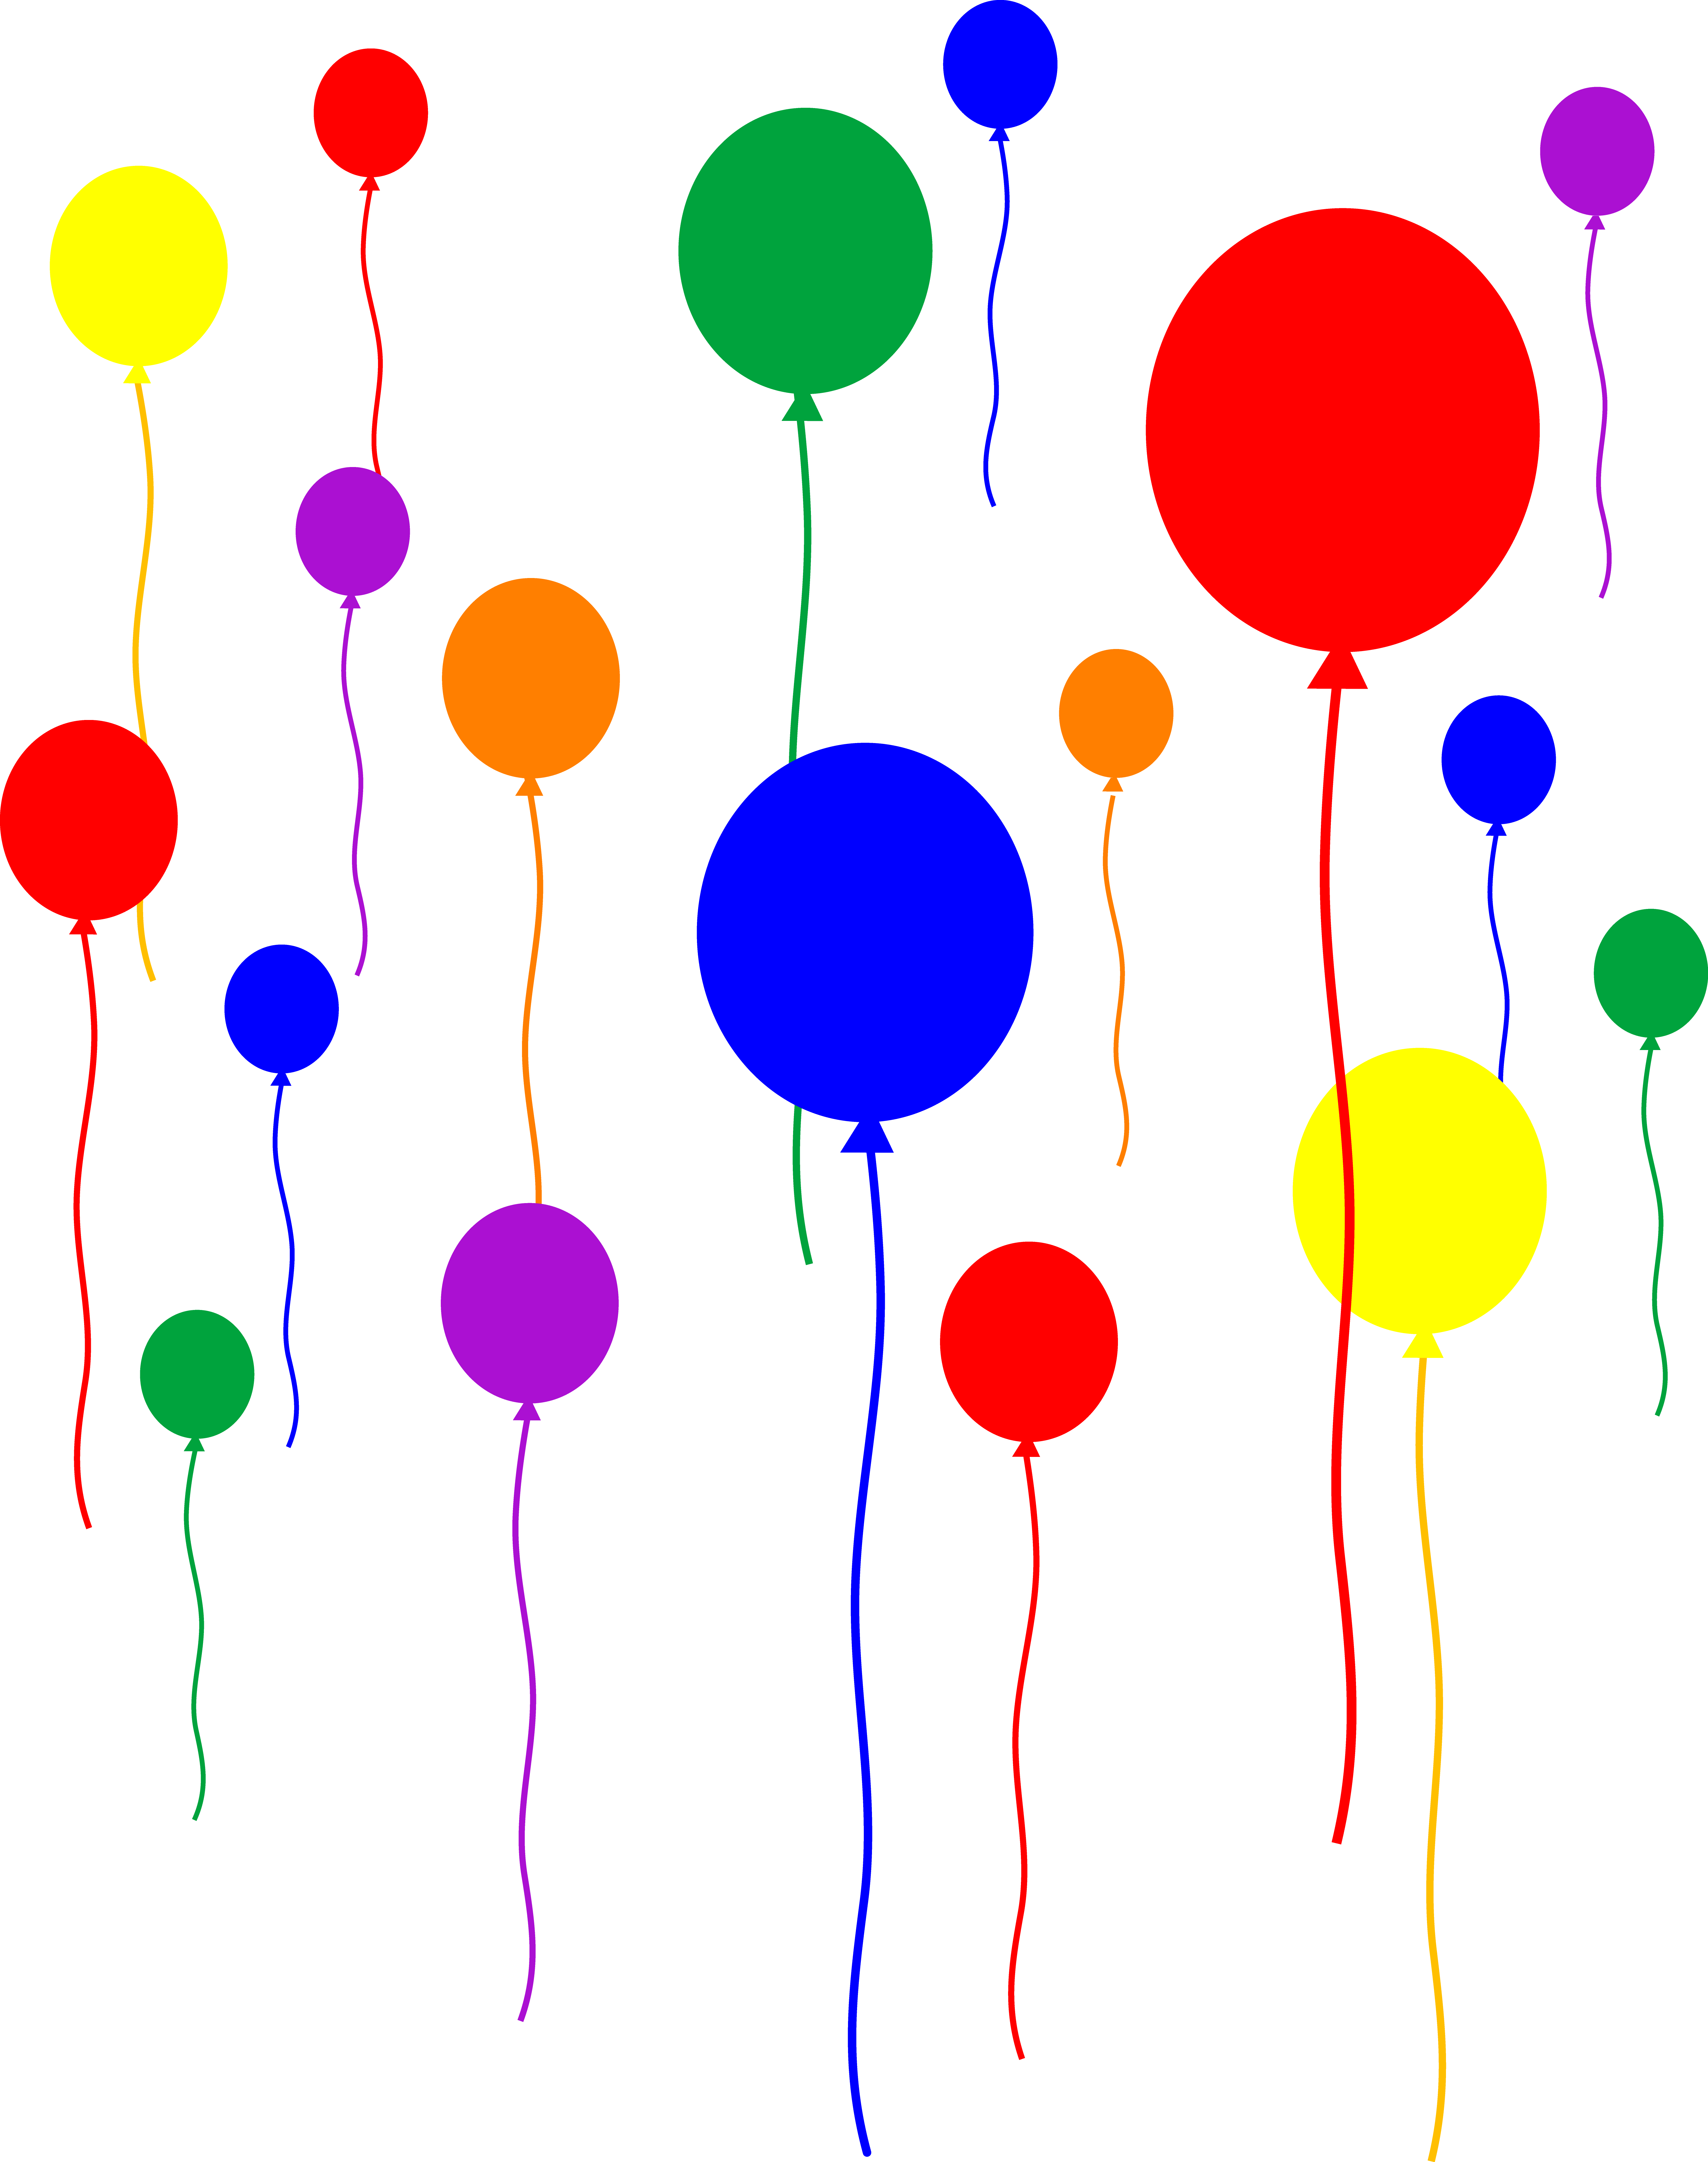 Balloon Clipart Png | Clipart Panda - Free Clipart Images